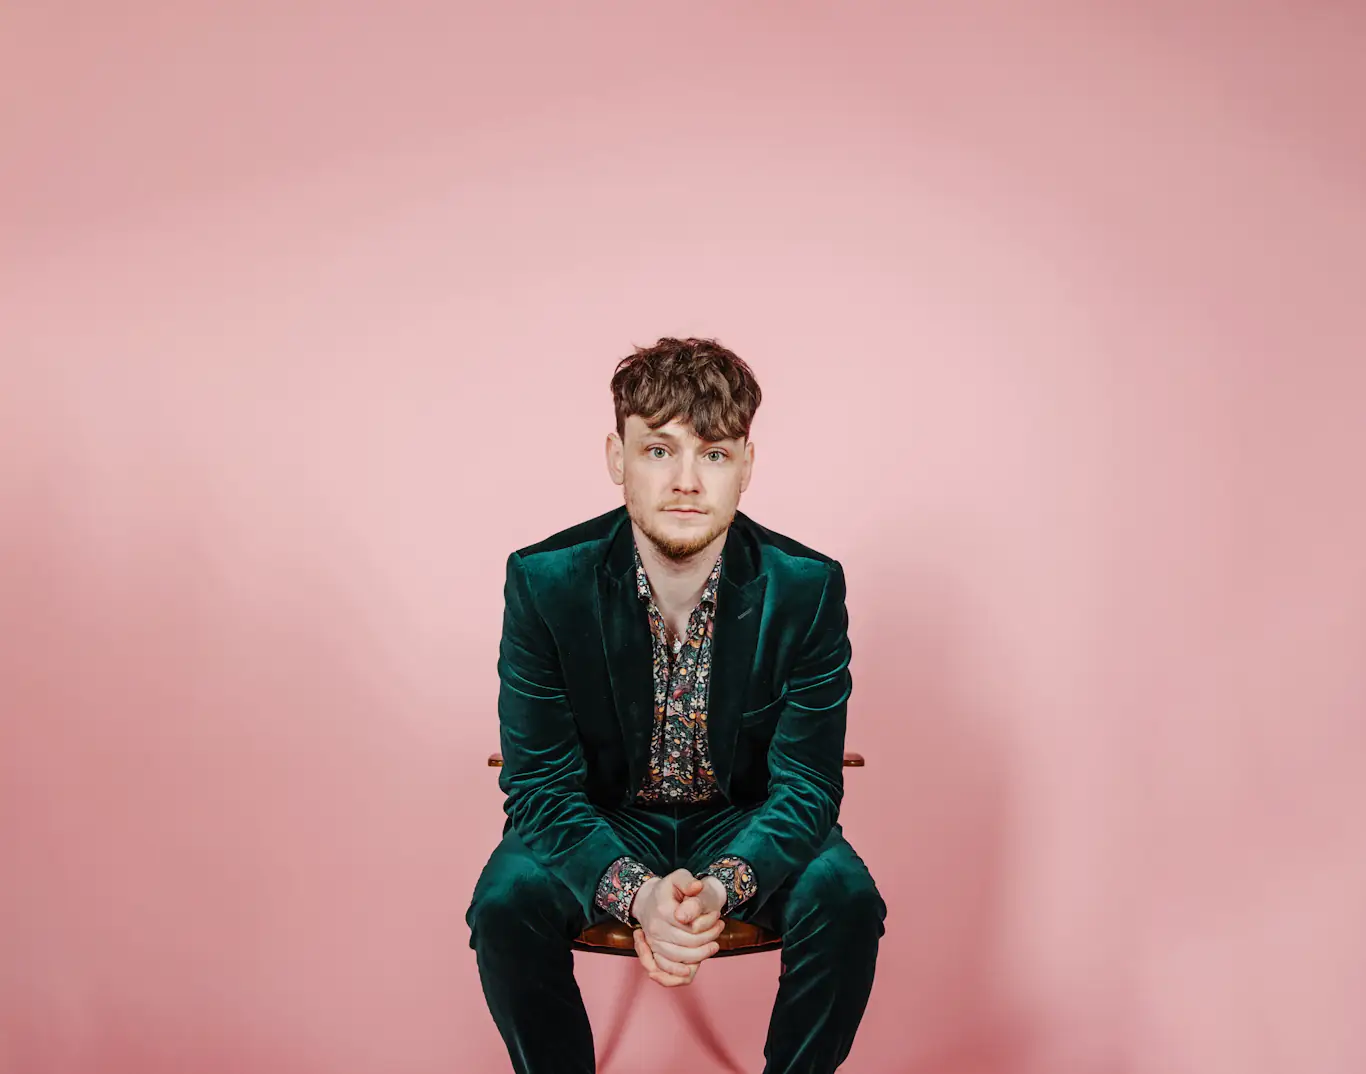 RYAN MCMULLAN announces headline show at the Ulster Hall, Belfast in December